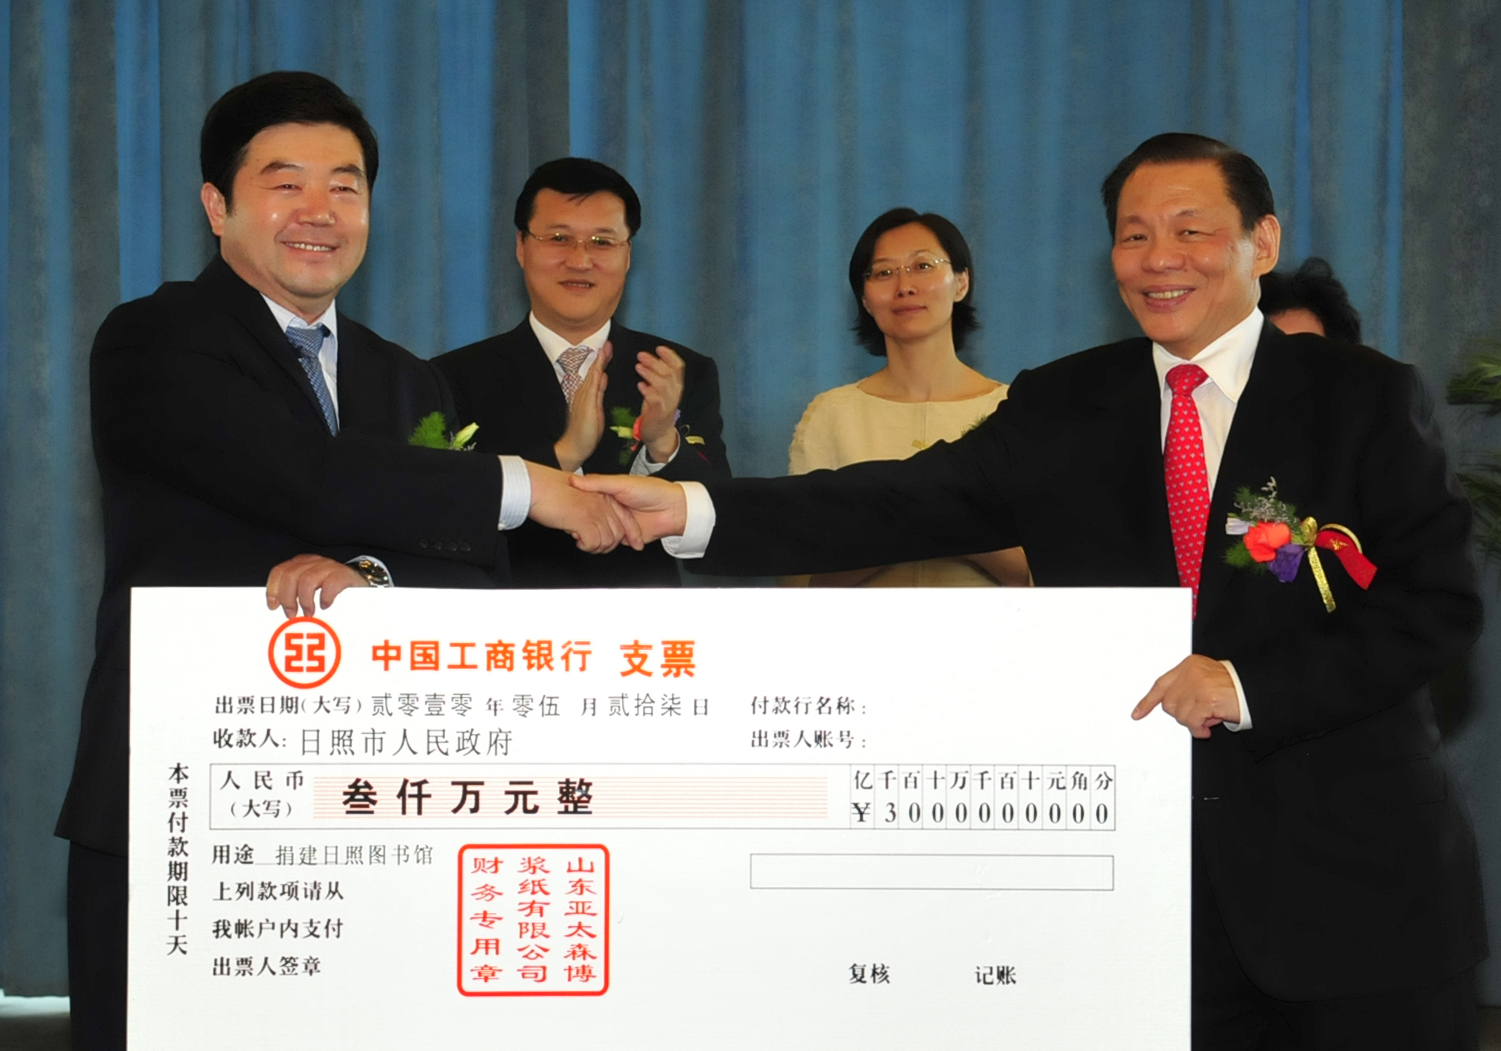 Throwback May 2010: Mr Sukanto Tanoto made a RMB 30 million donation for the construction of the library. The library opened in Dec 2015, and is patronised by thousands daily.